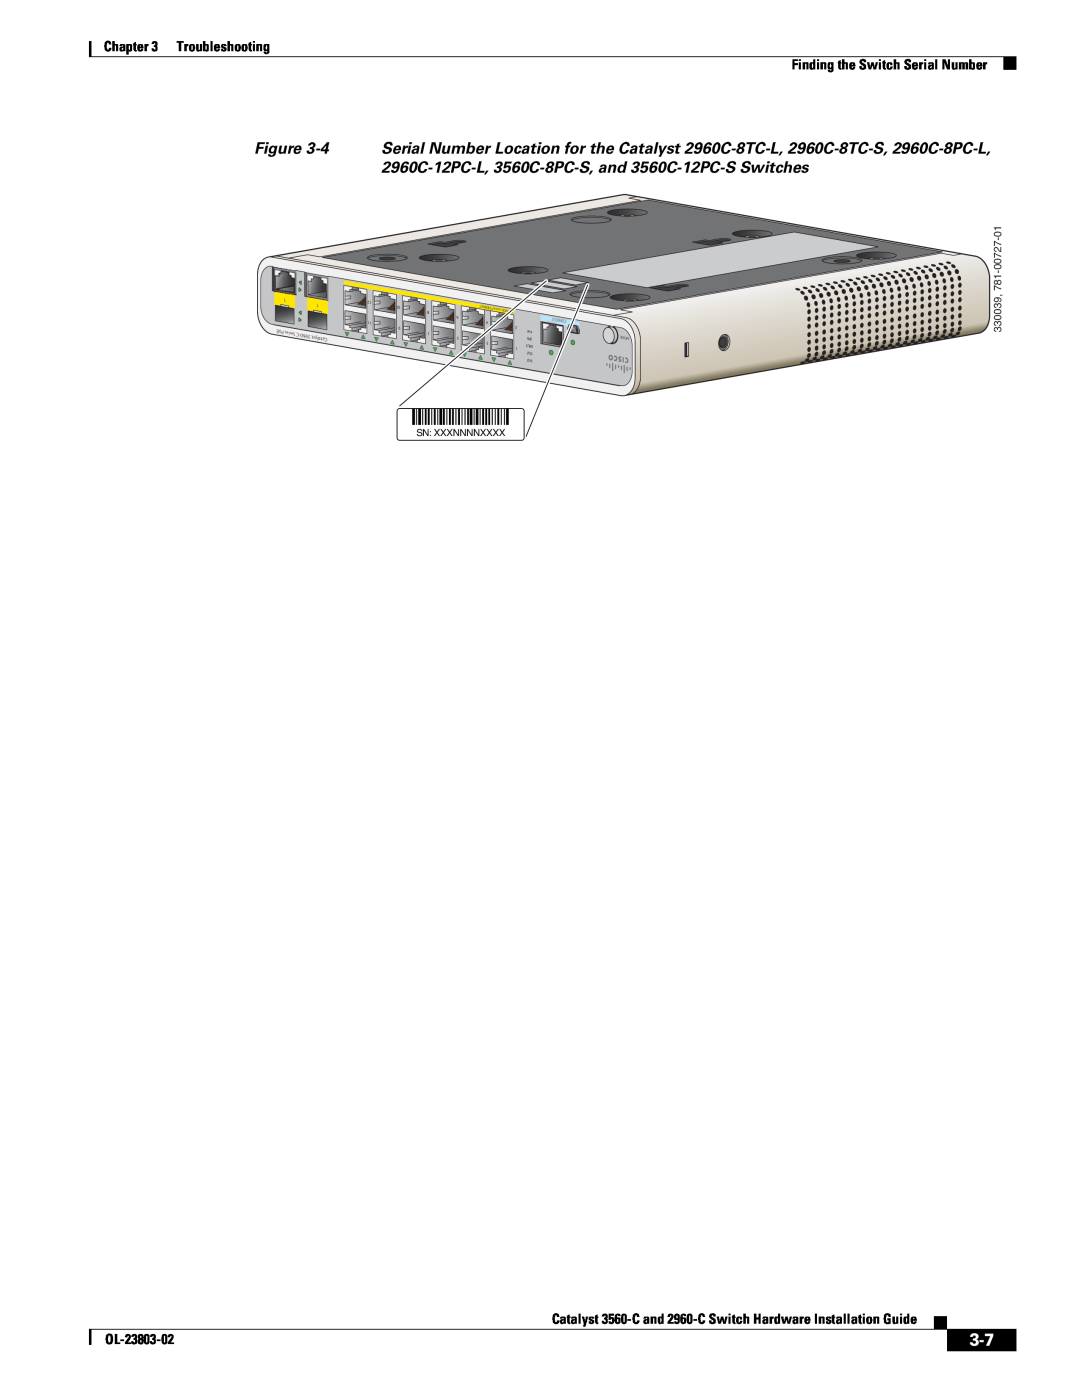 Cisco Systems 3560-C Troubleshooting Finding the Switch Serial Number, OL-23803-02, 330039, Sn Xxxnnnnxxxx, Oleconsolecon 